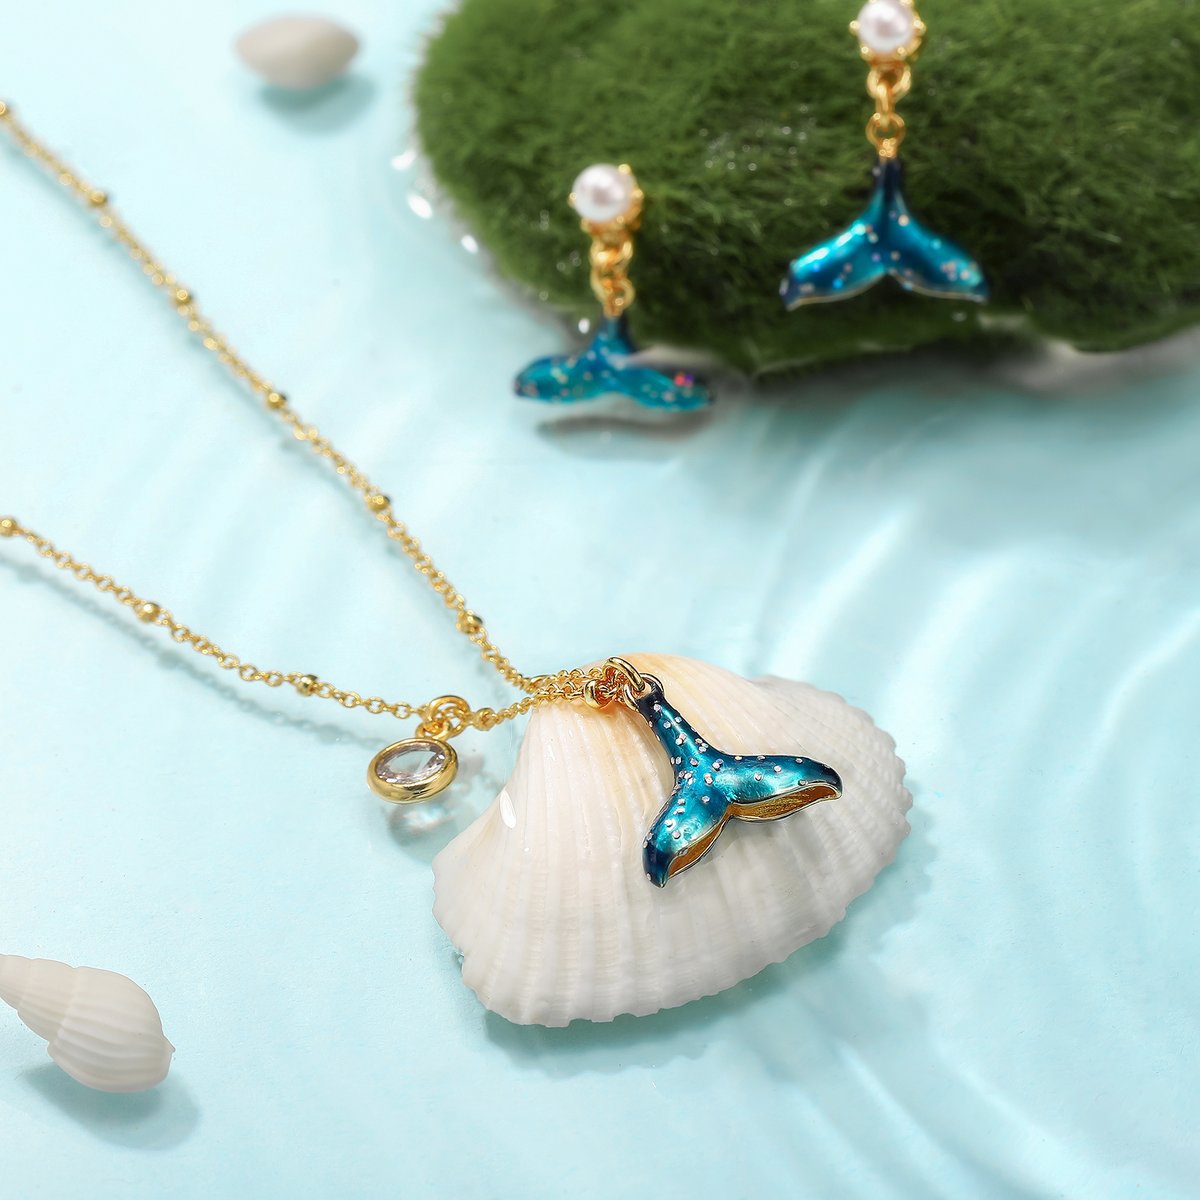 🧜‍♀️🌊Get your tail to the beach with this Mermaid Tail Necklace.

Shop in the link, selenichast.com/collections/oc…
#selenichast #selenichastjewel #necklace #summerjewelry #mermaidnecklace #naturevibes #finejewelry #jewelryaddicts #fashiontrends #cottagecoreaesthetics #naturelover